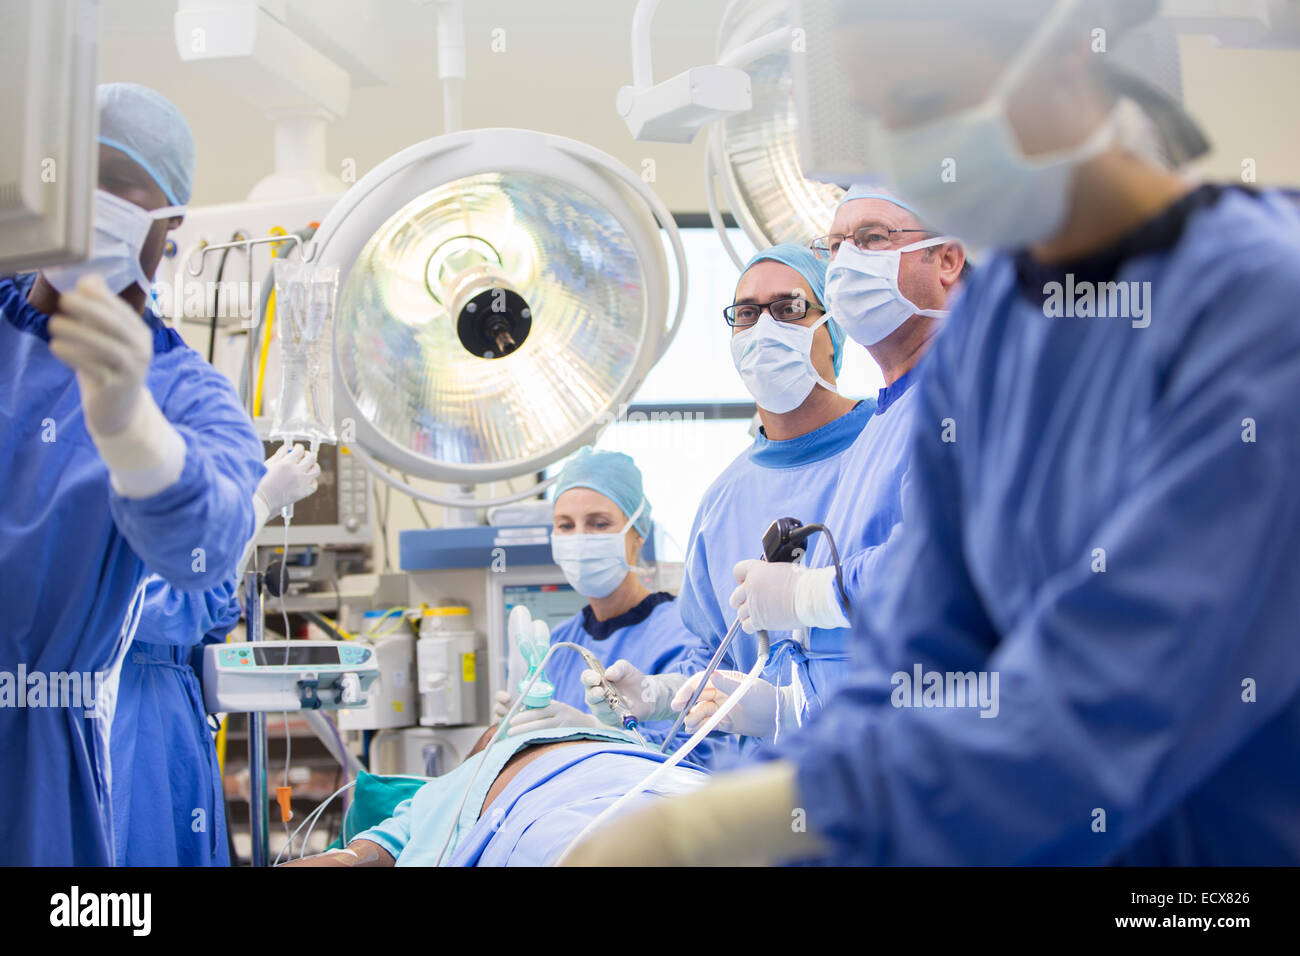 Doctors performing surgery in operating theater, looking at monitor Stock Photo